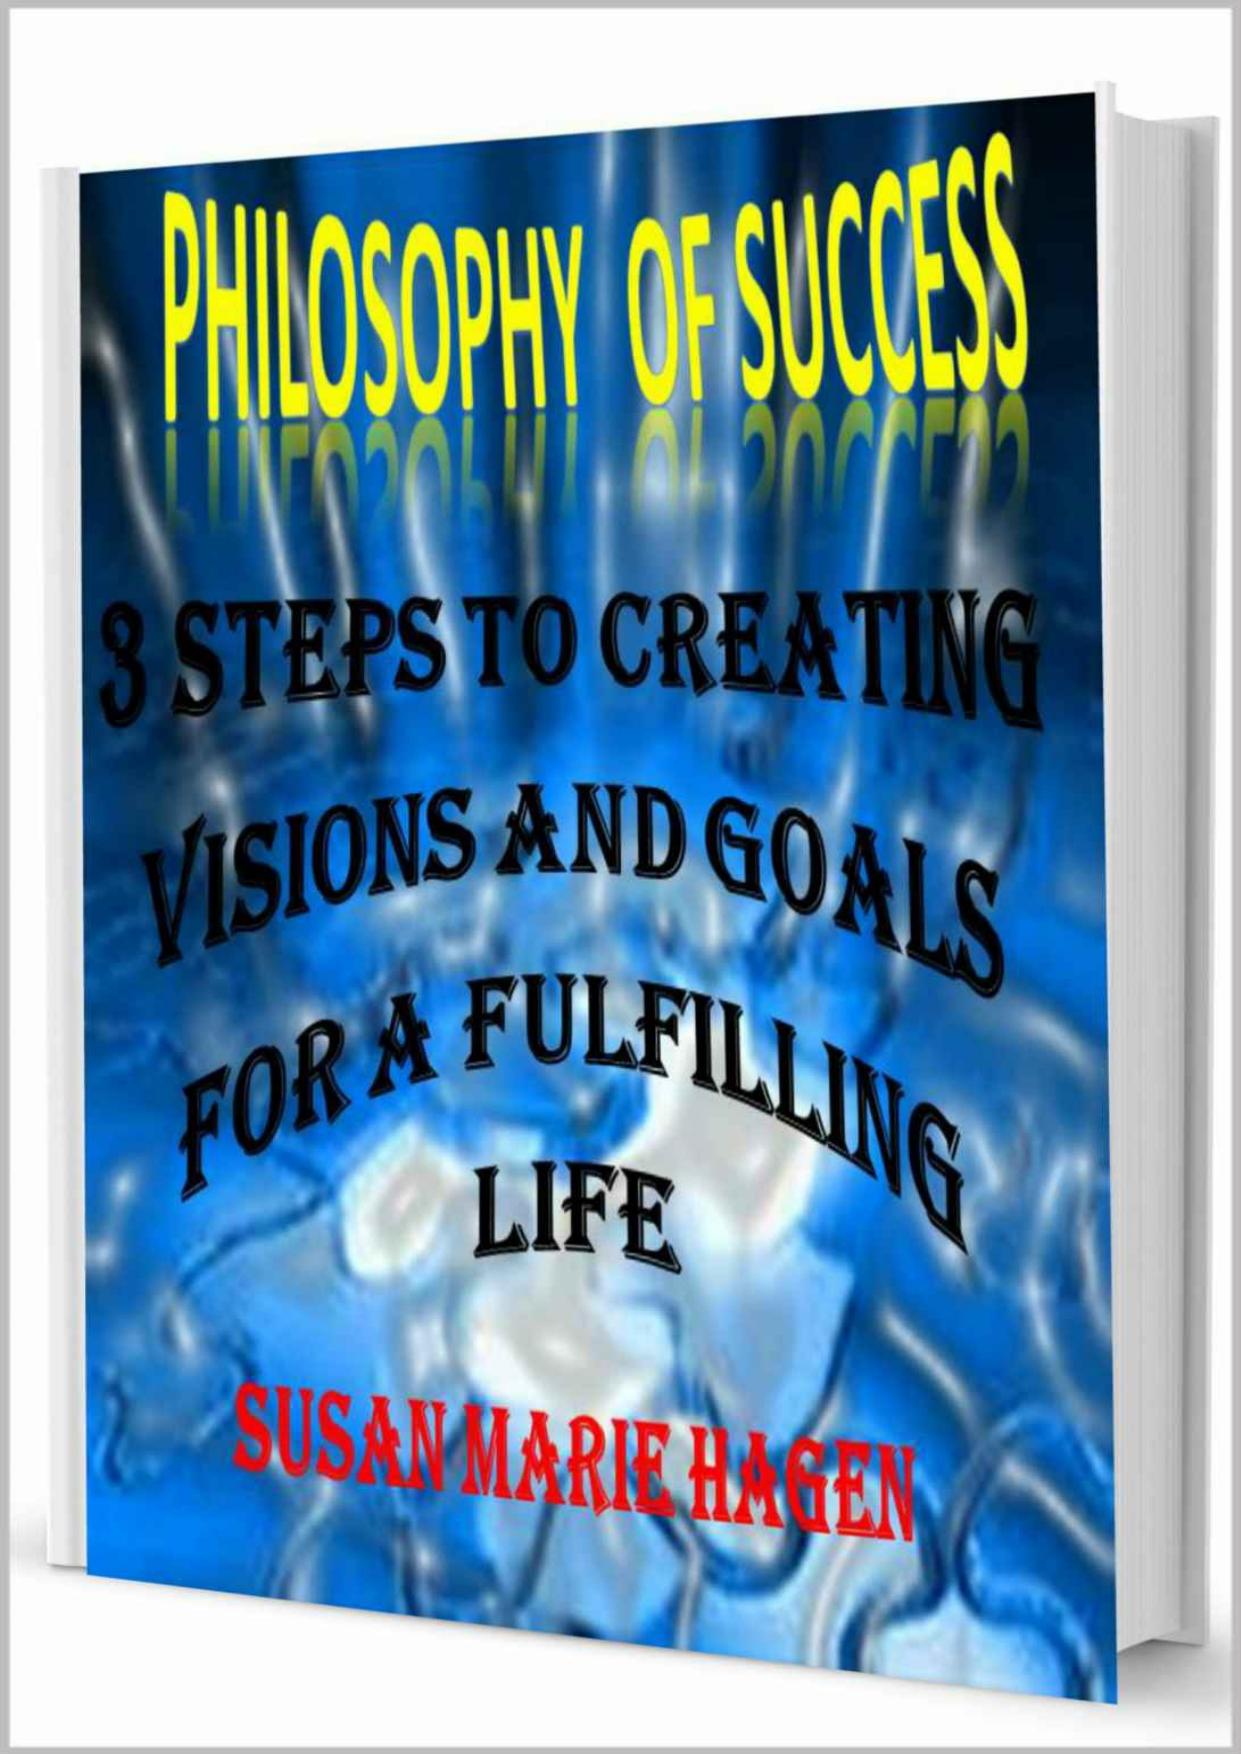 Philosophy of Success: 3 Steps To Creating Personal Visions and Goals for a Fulfilling Life (EMindDesign Enrichment Series)